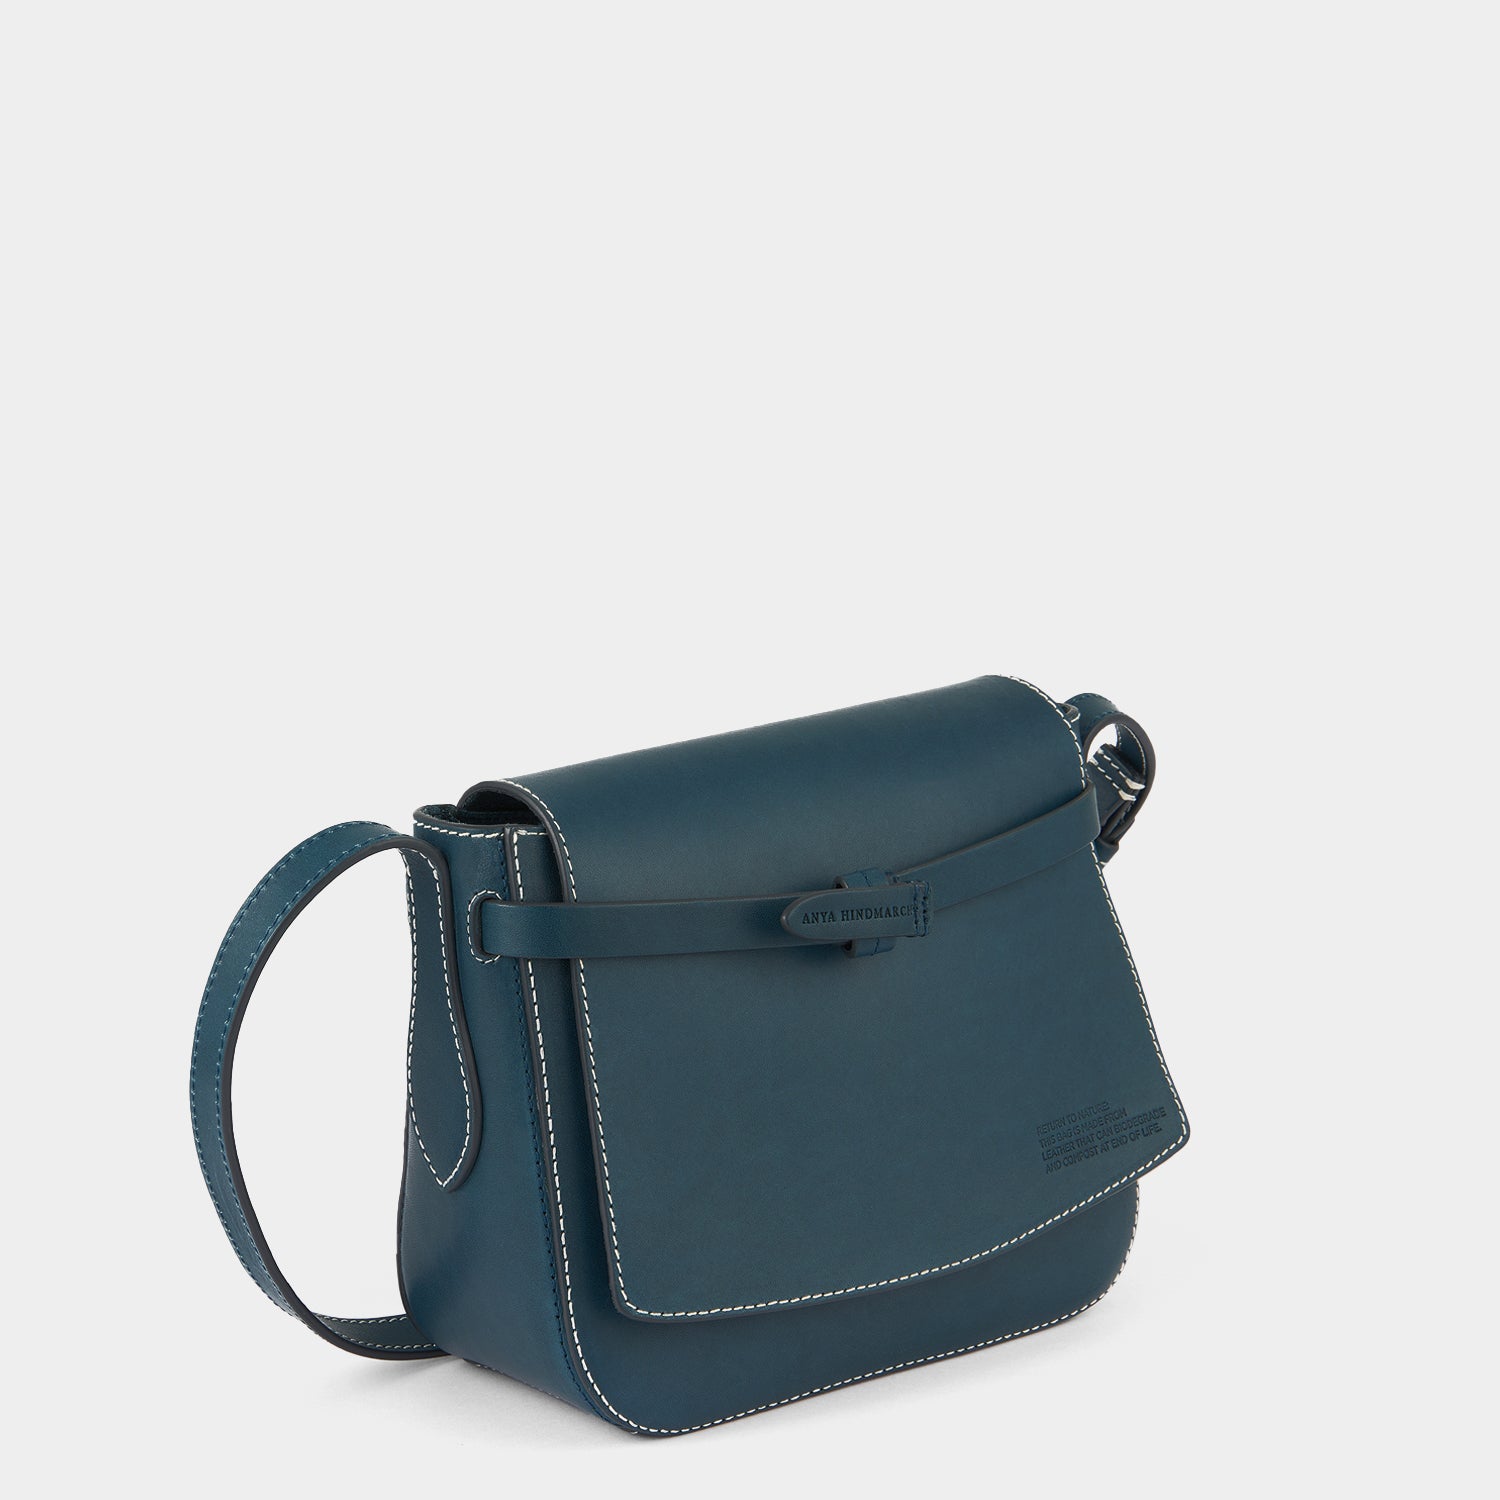 「Return to Nature」 クロスボディ -

                  
                    Compostable Leather in Dark Holly -
                  

                  Anya Hindmarch JP
